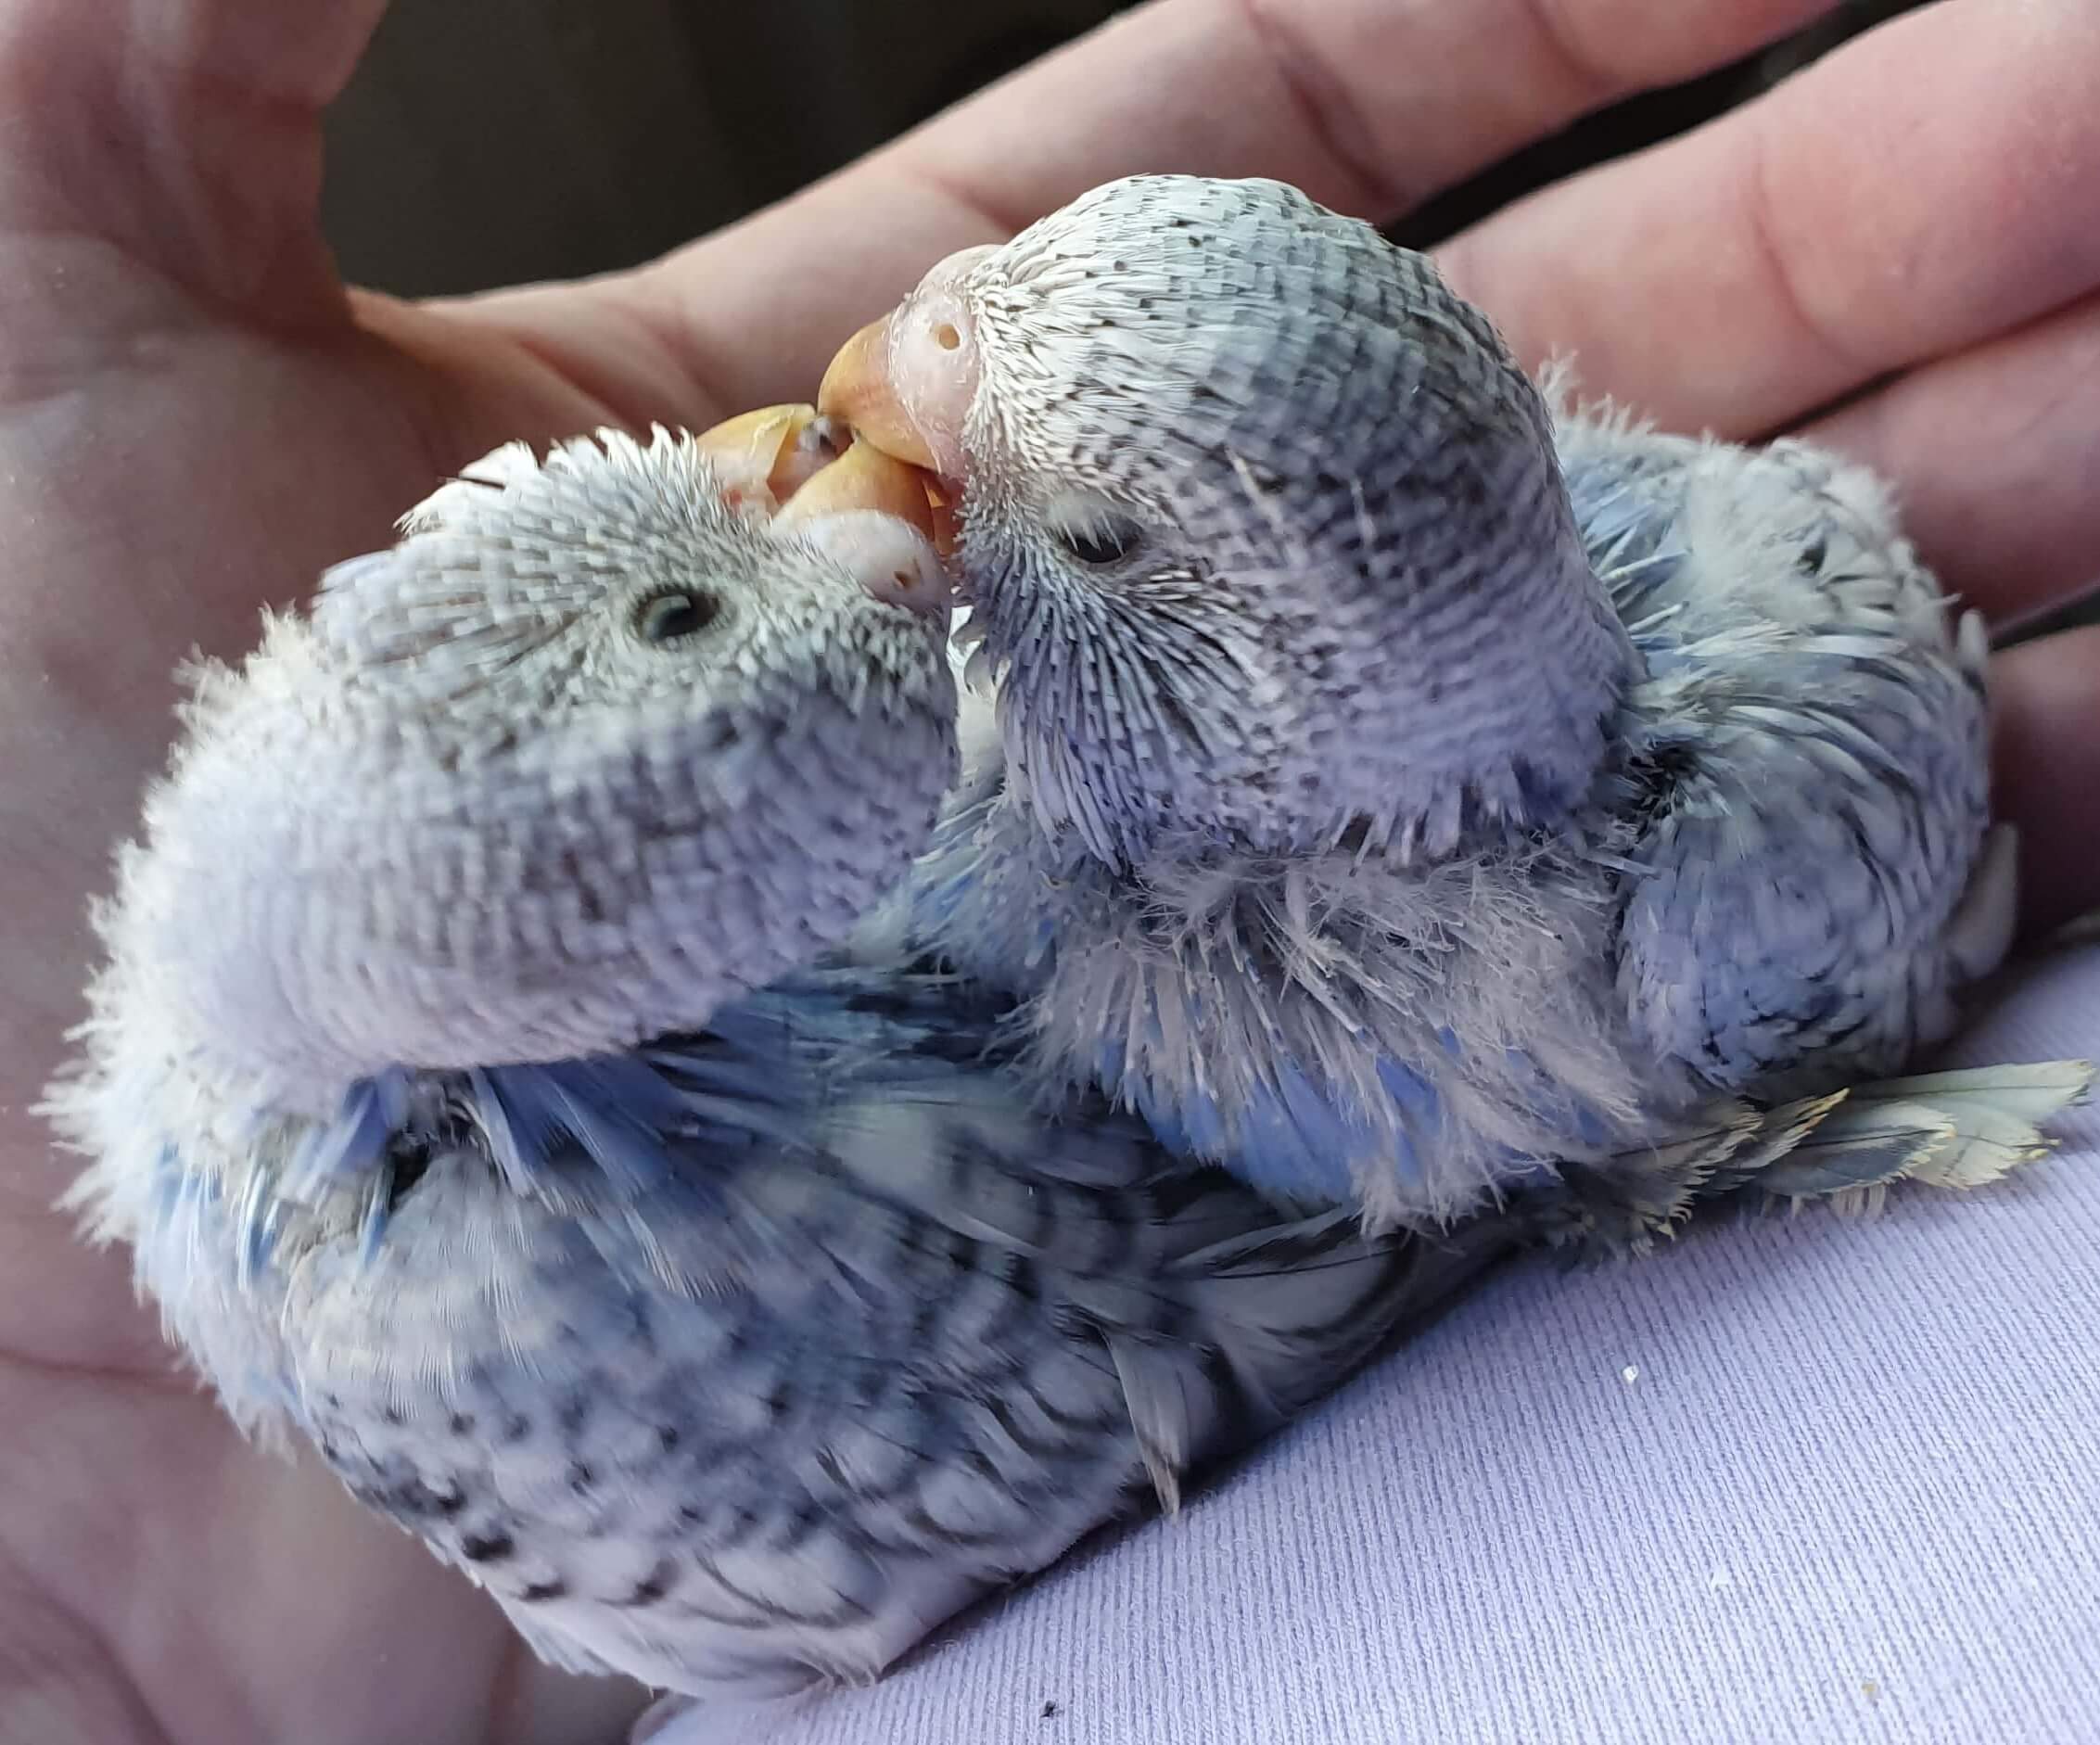 Buy a baby budgy from Baby Budgies Geelong. We sell healthy birds direct to the public